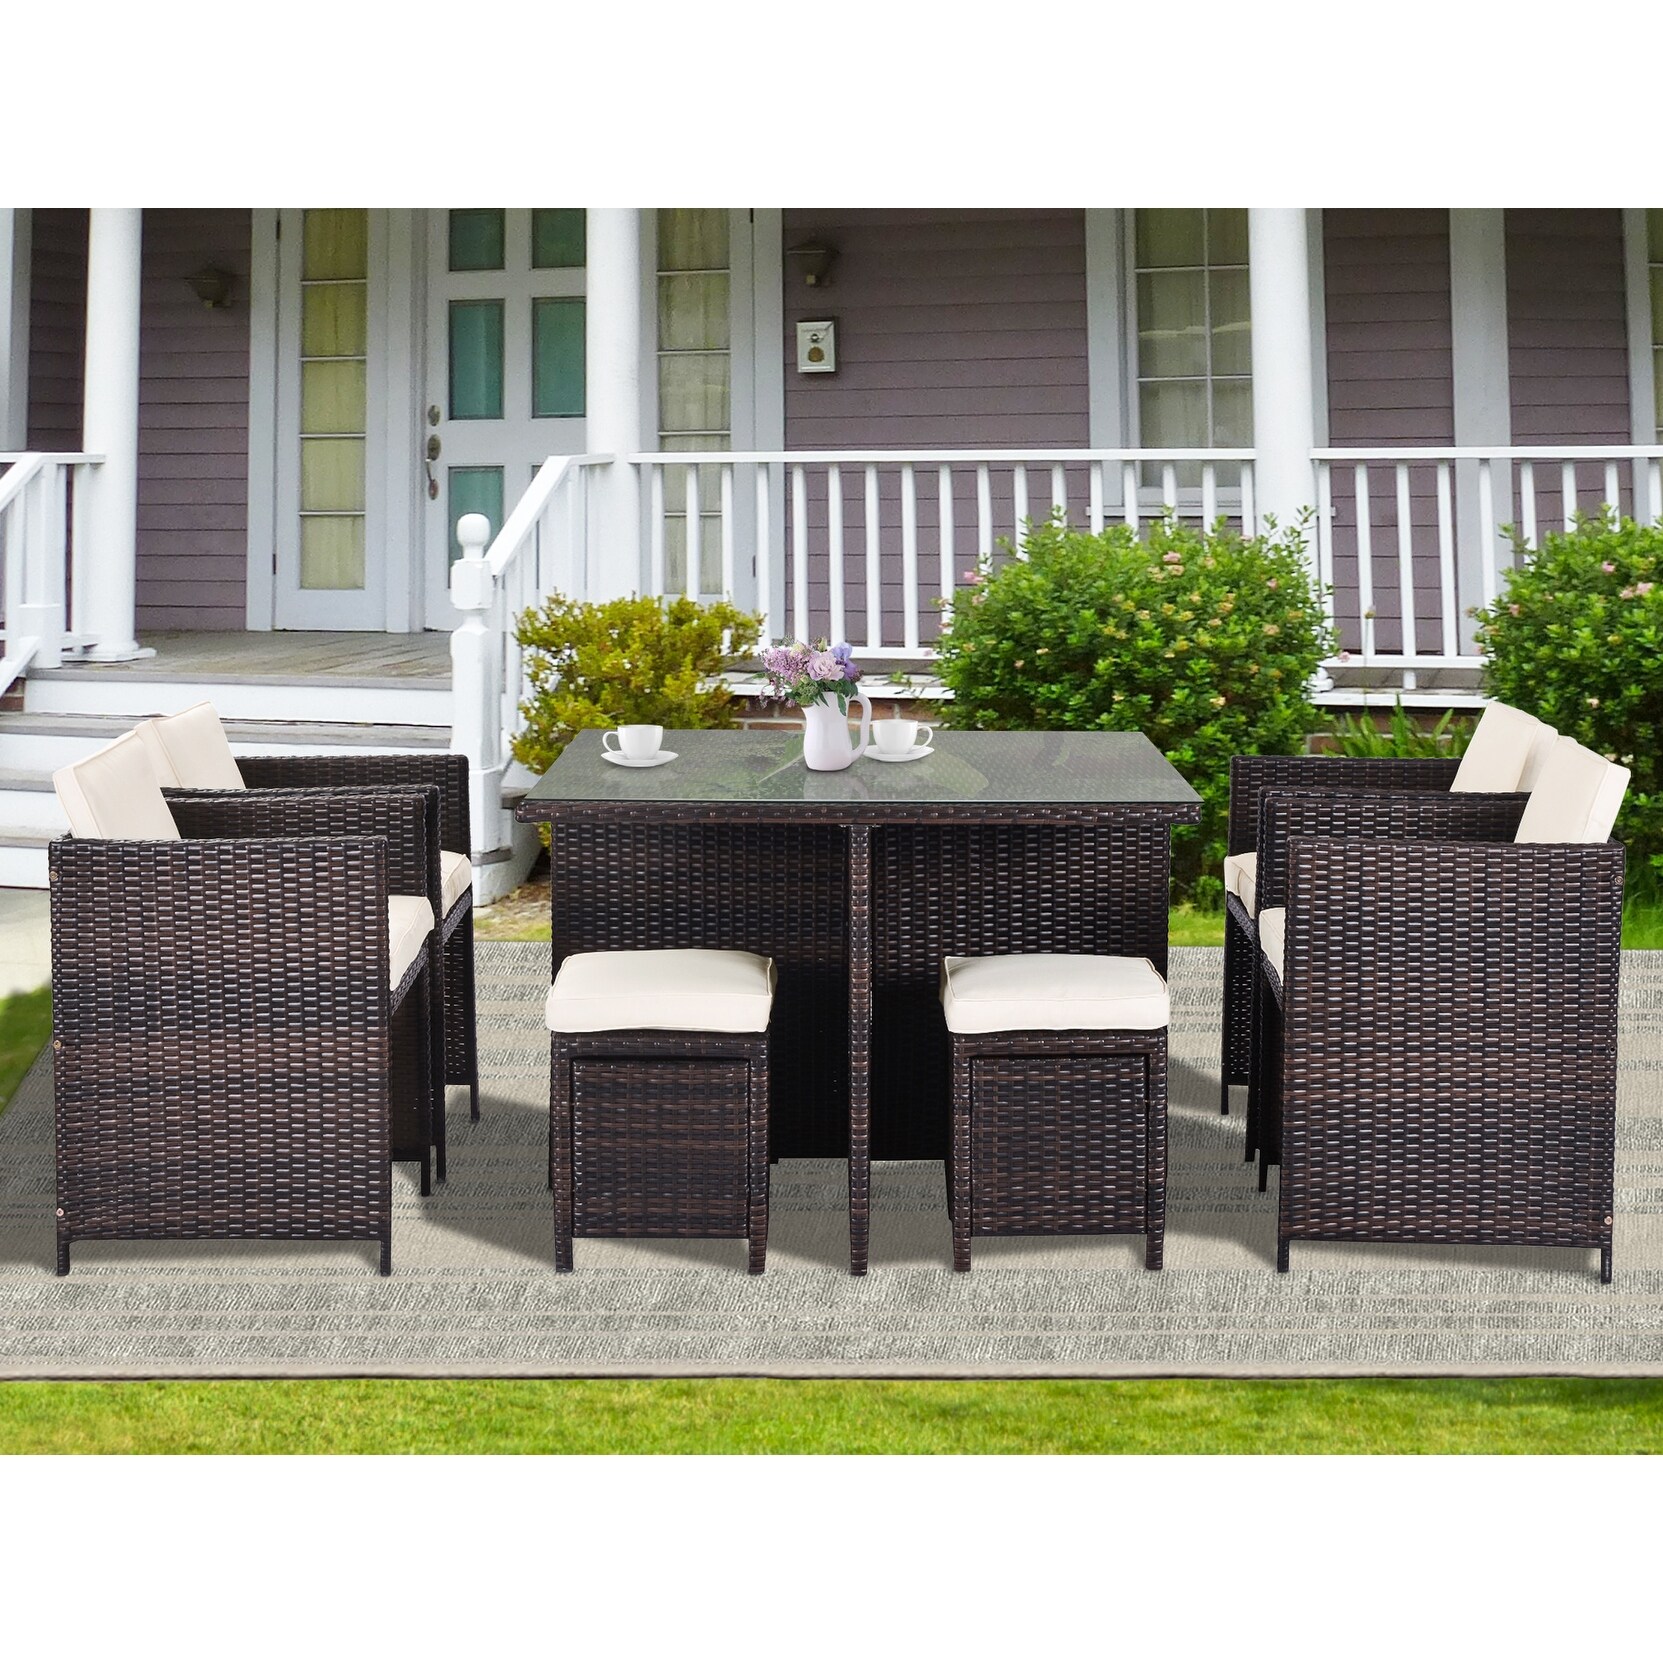 9pcs Patio Wicker Sectional Set With 1 Table&4 Chairs&4 Ottomans brown